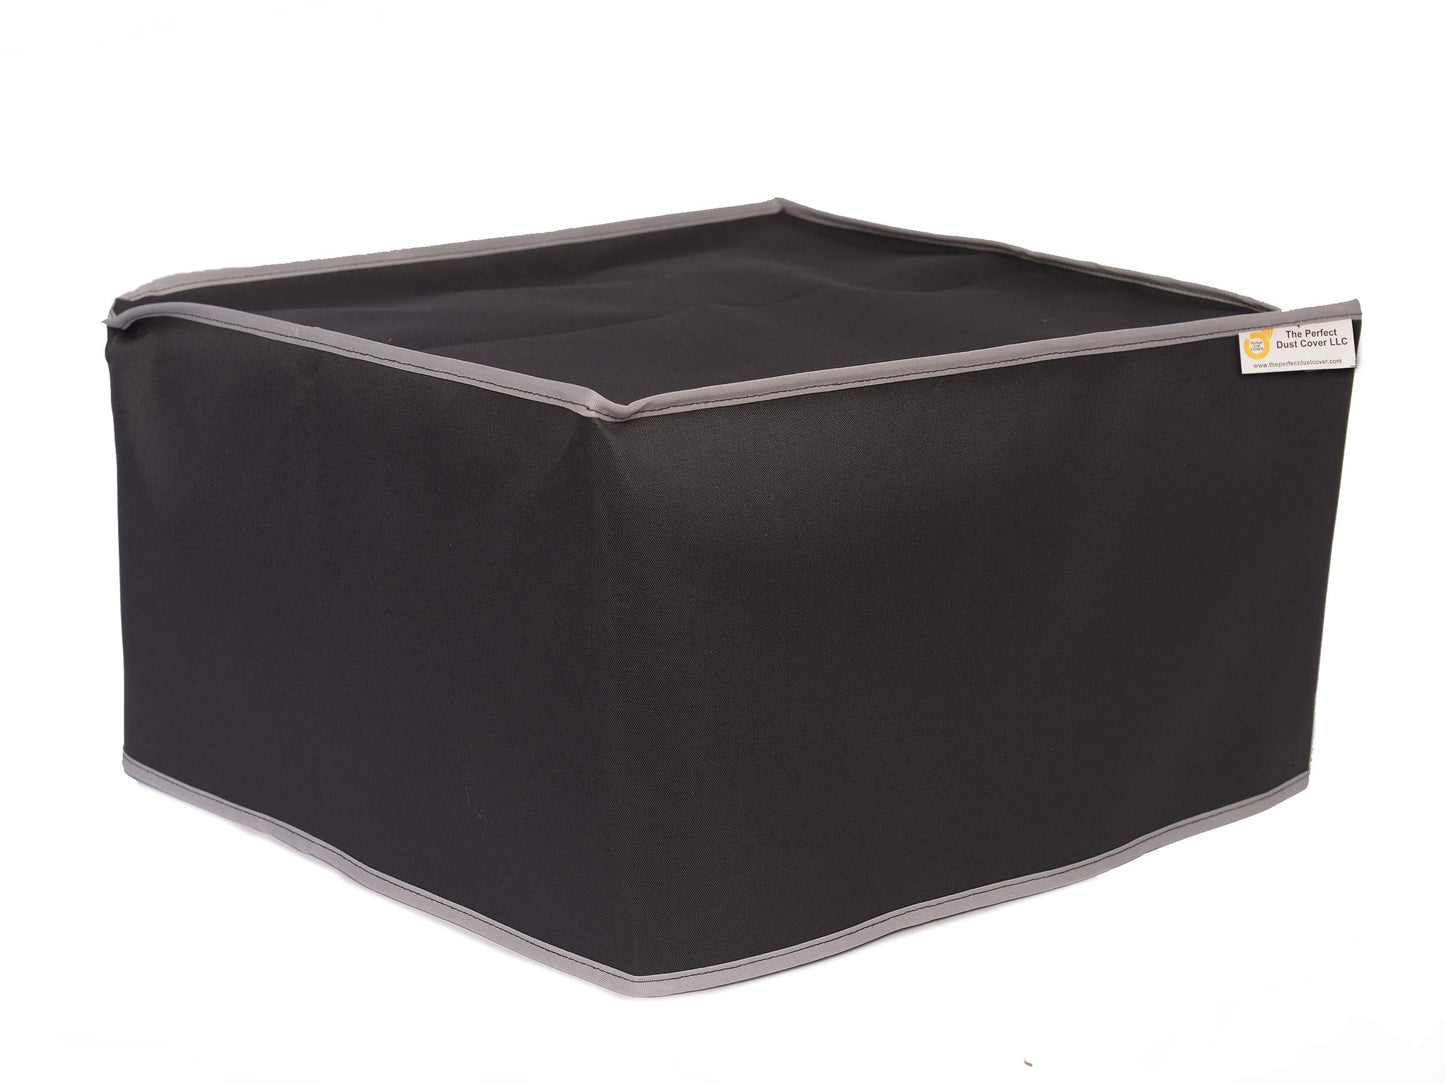 The Perfect Dust Cover, Black Nylon Cover for Epson Workforce ET-4550 EcoTank Printer, Anti Static and Waterproof Cover Dimensions 20.3''W x 14.2''D x 9.5''H by The Perfect Dust Cover LLC